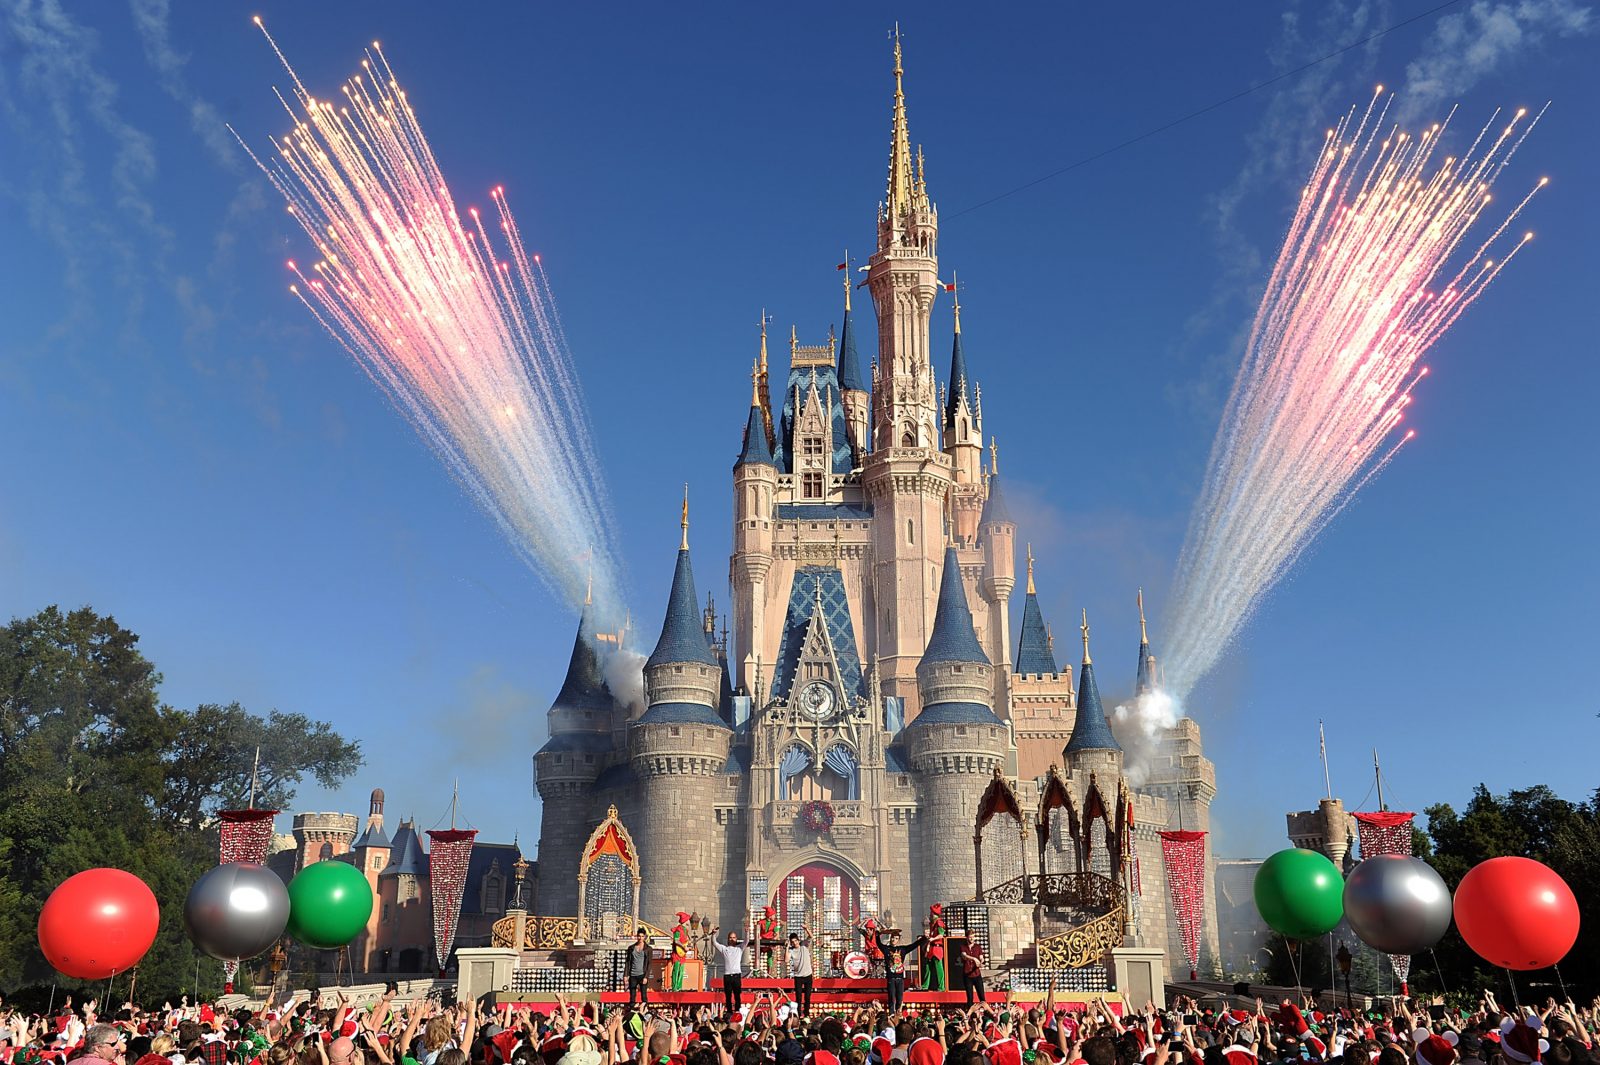 ✈️ Plan a Vacation and We’ll Tell You What to Watch on Netflix Walt Disney World Resort in Orlando, Florida